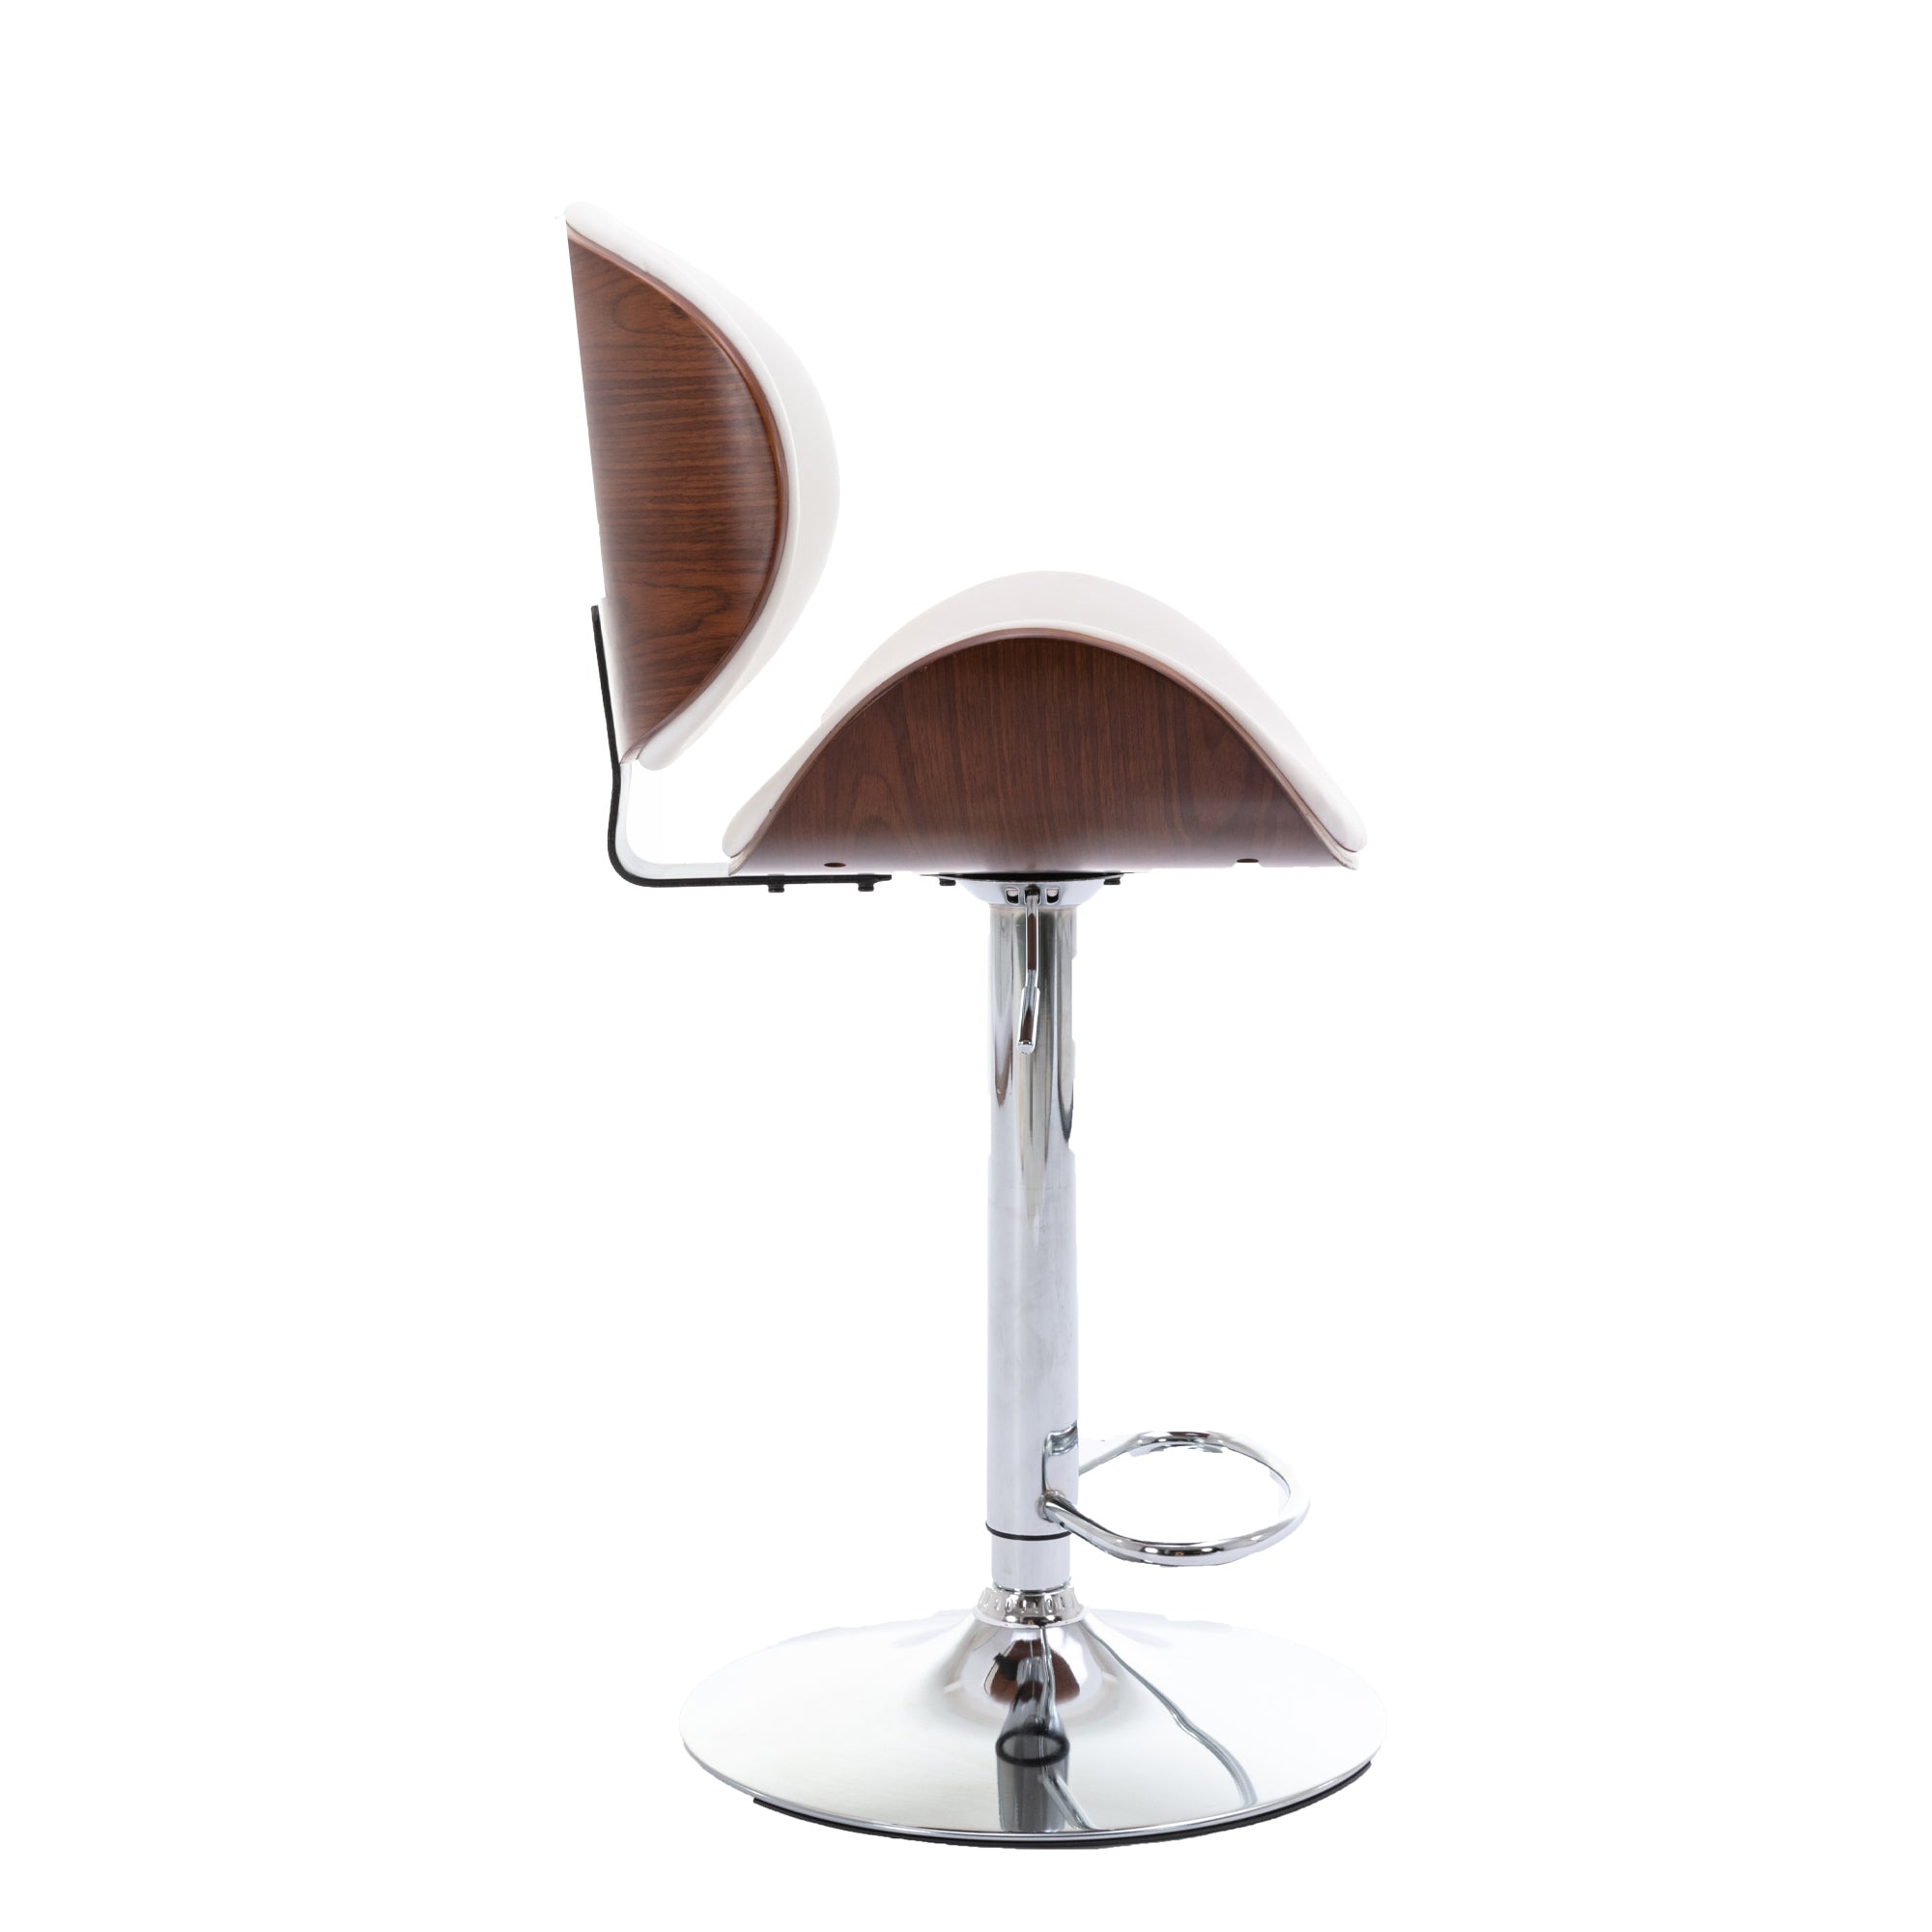 Set of 2 Modern Swivel Adjustable Barstools with Walnut Curved Back and White Faux Leather